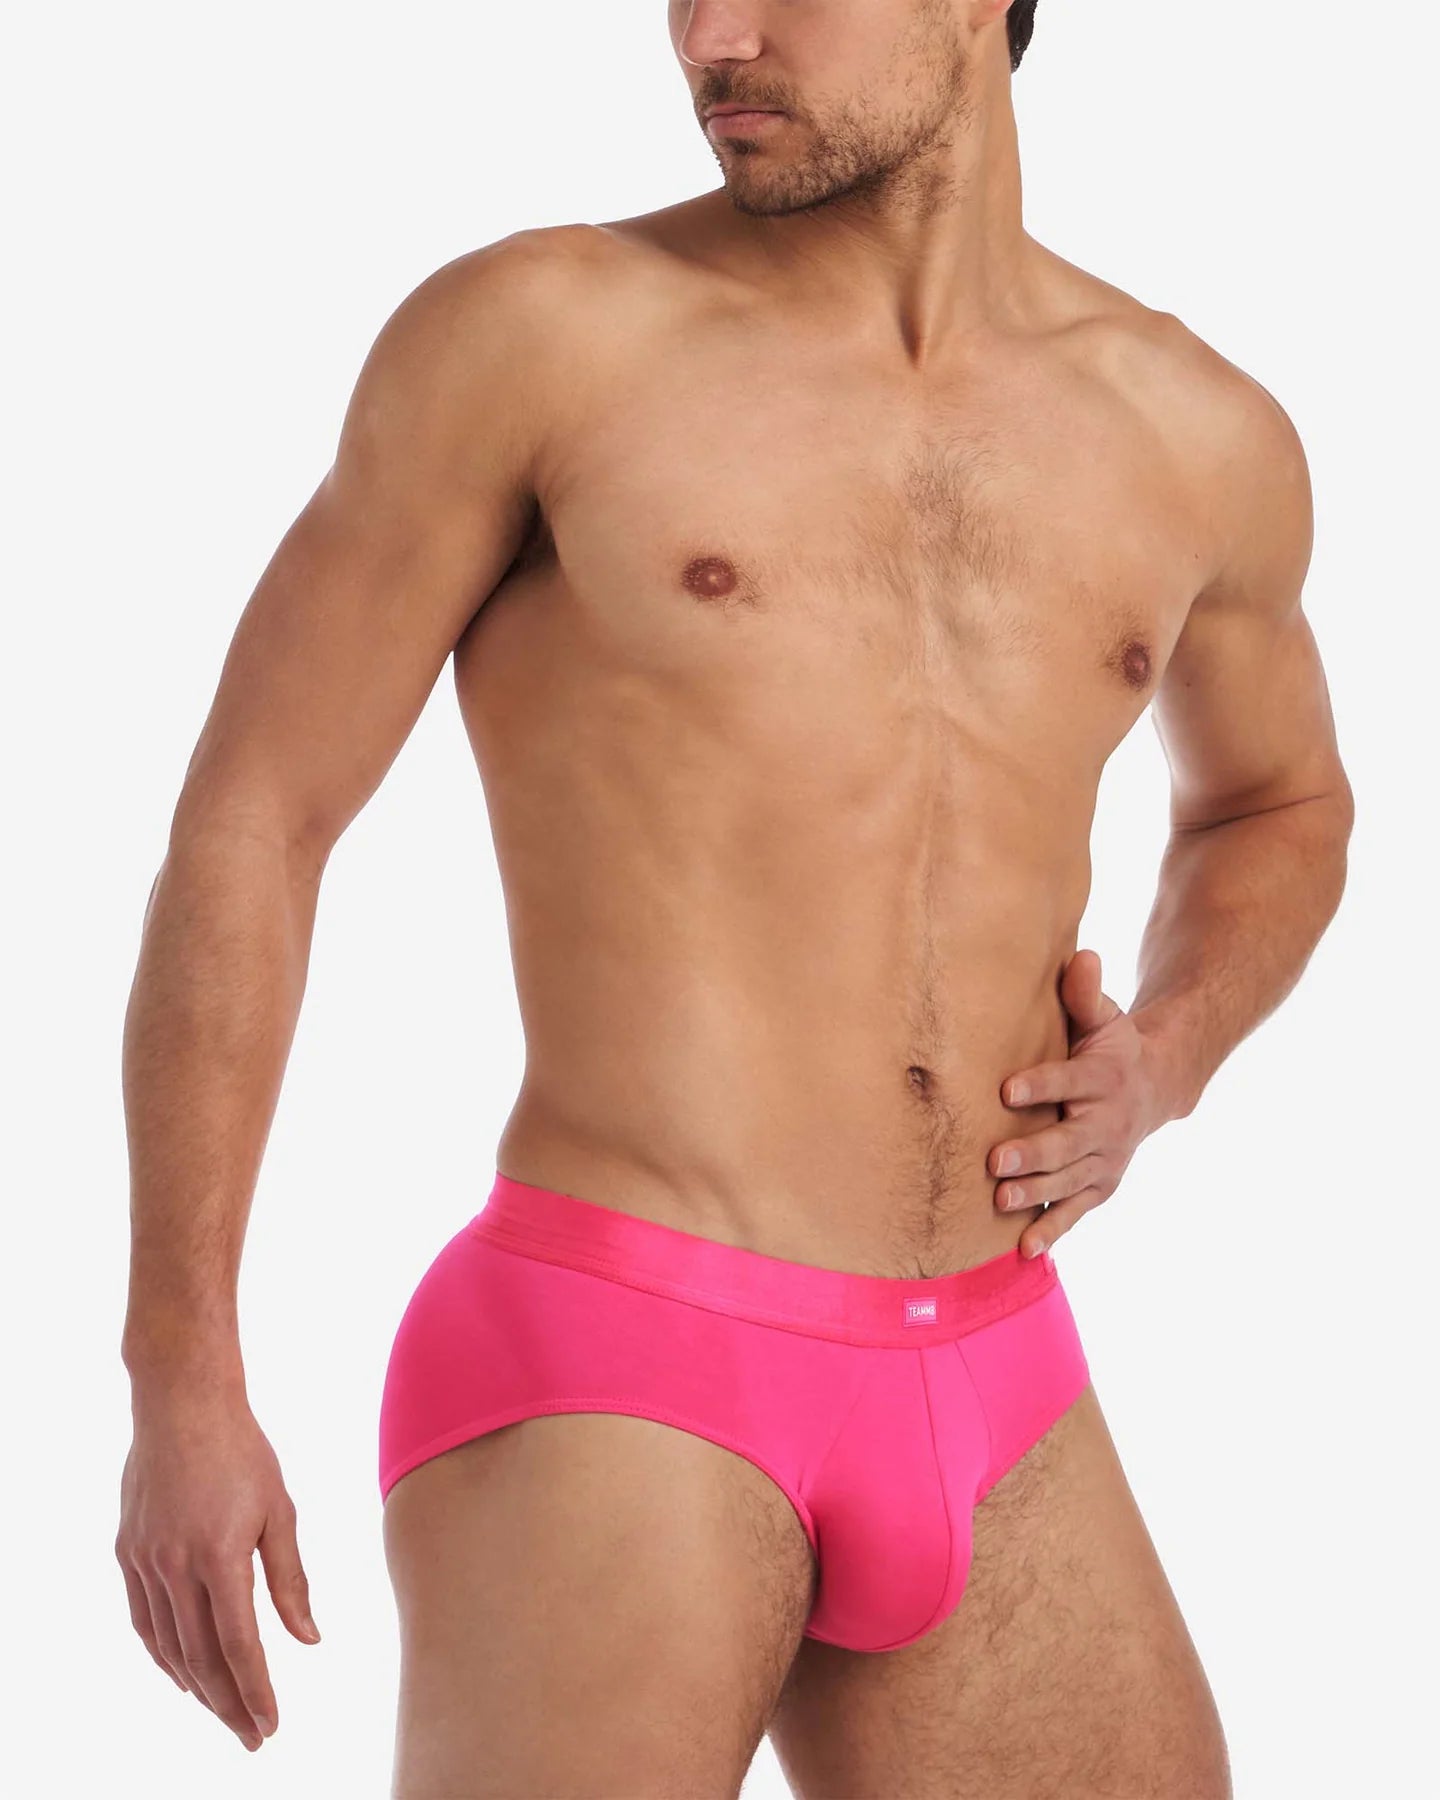 Teamm8 You Bamboo brief pink